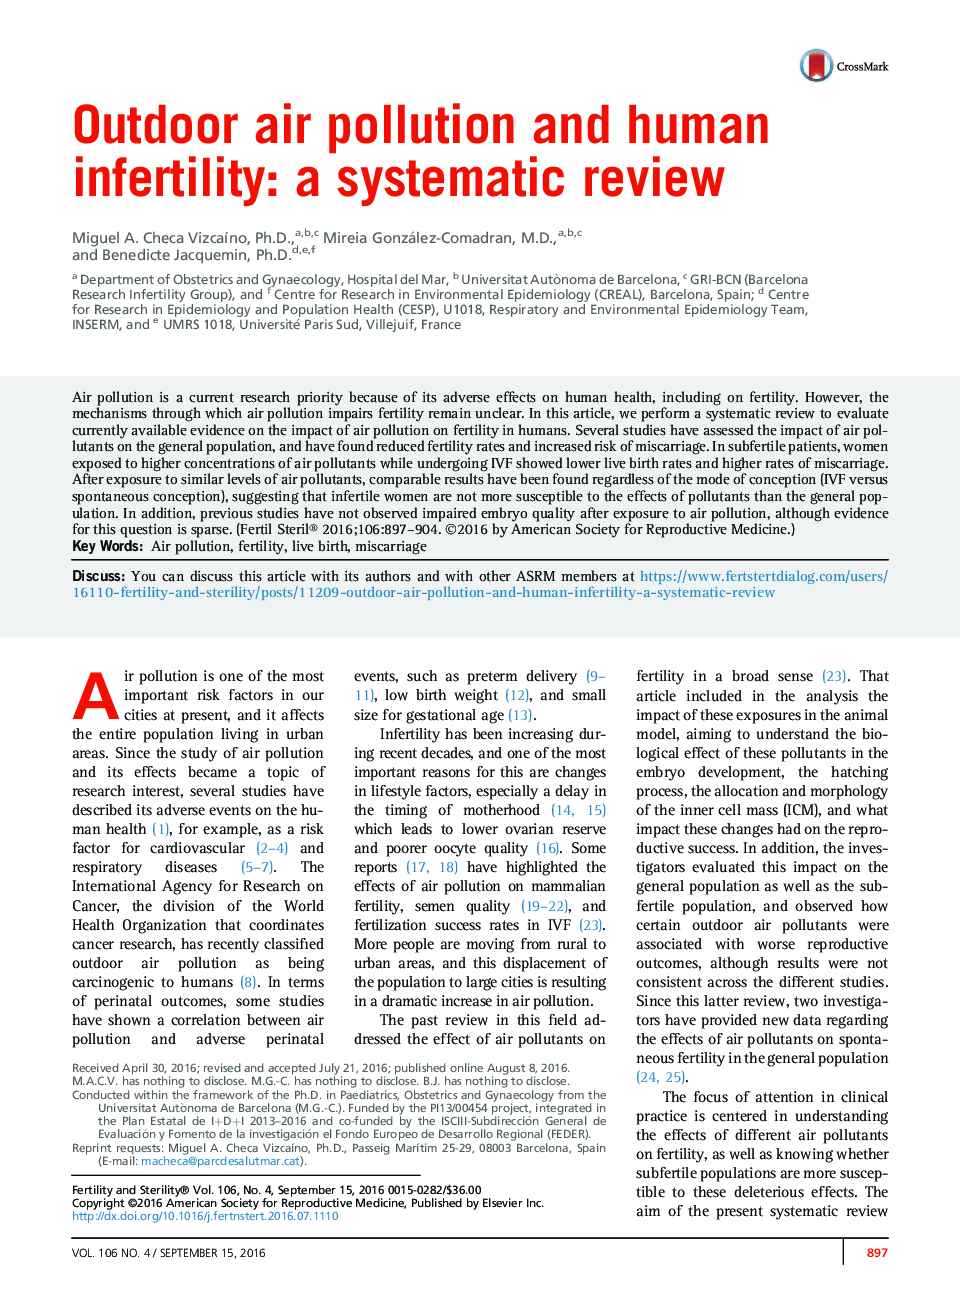 Outdoor air pollution and human infertility: a systematic review